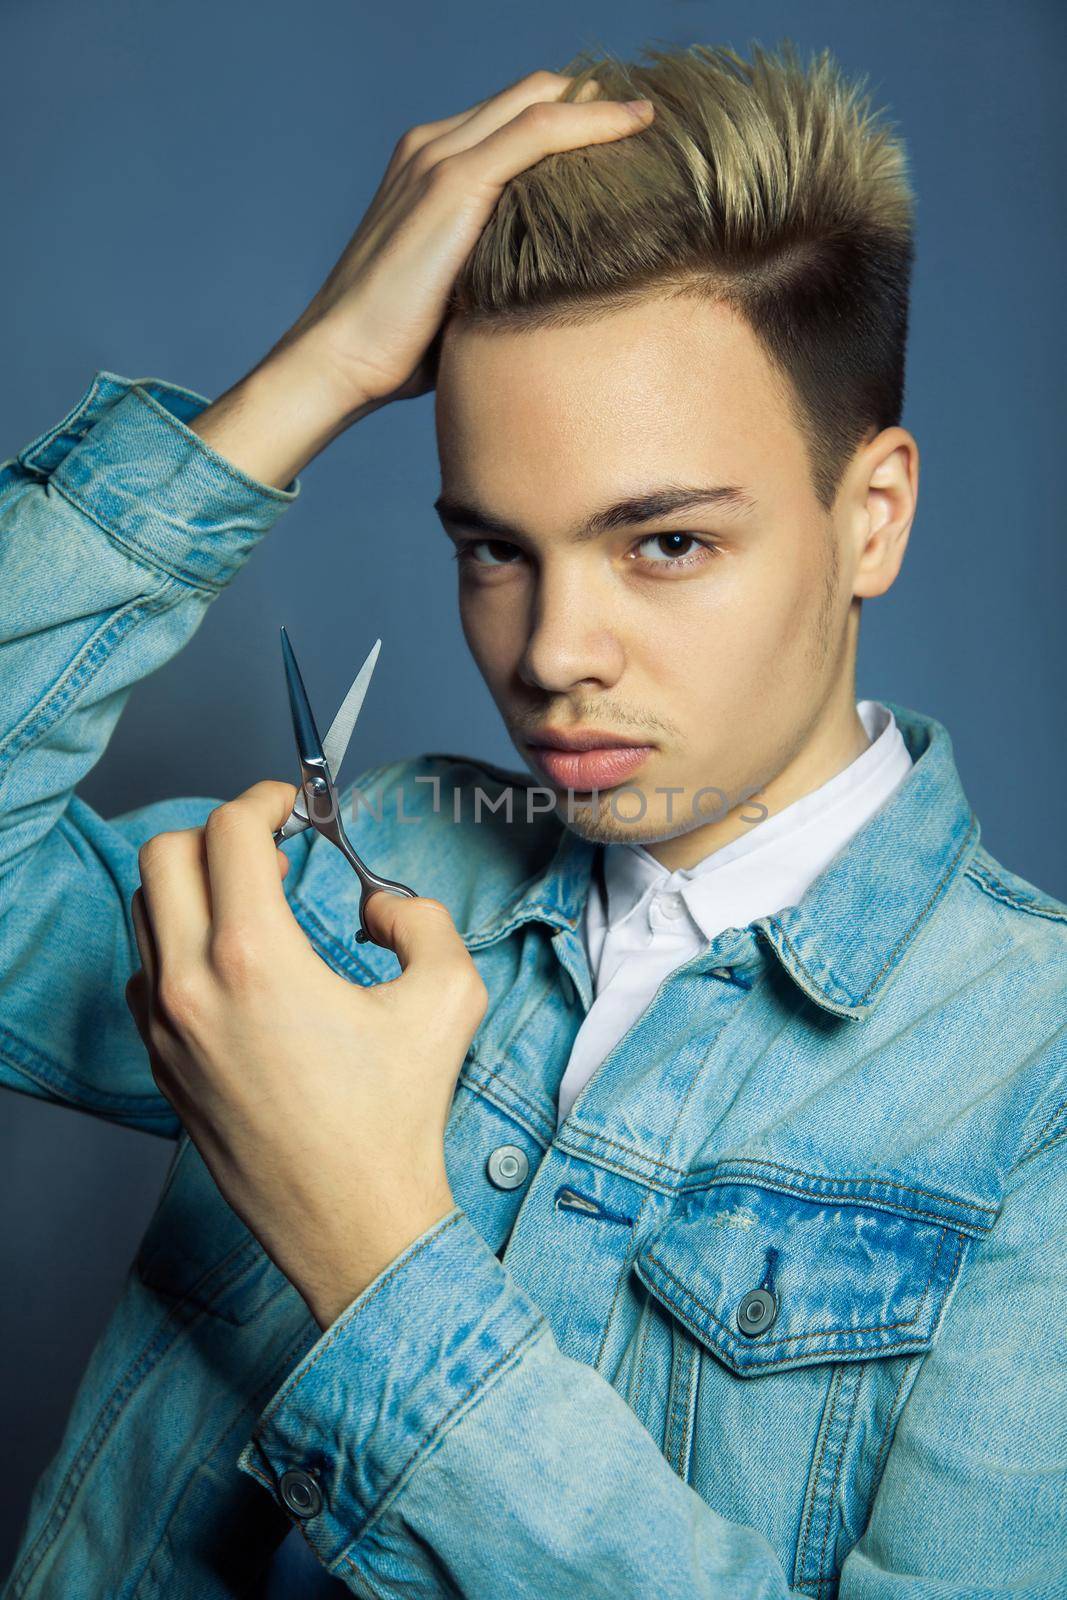 Portrait of fashion blonde Barber hairstylist with scissors in hand near eye on blue background.